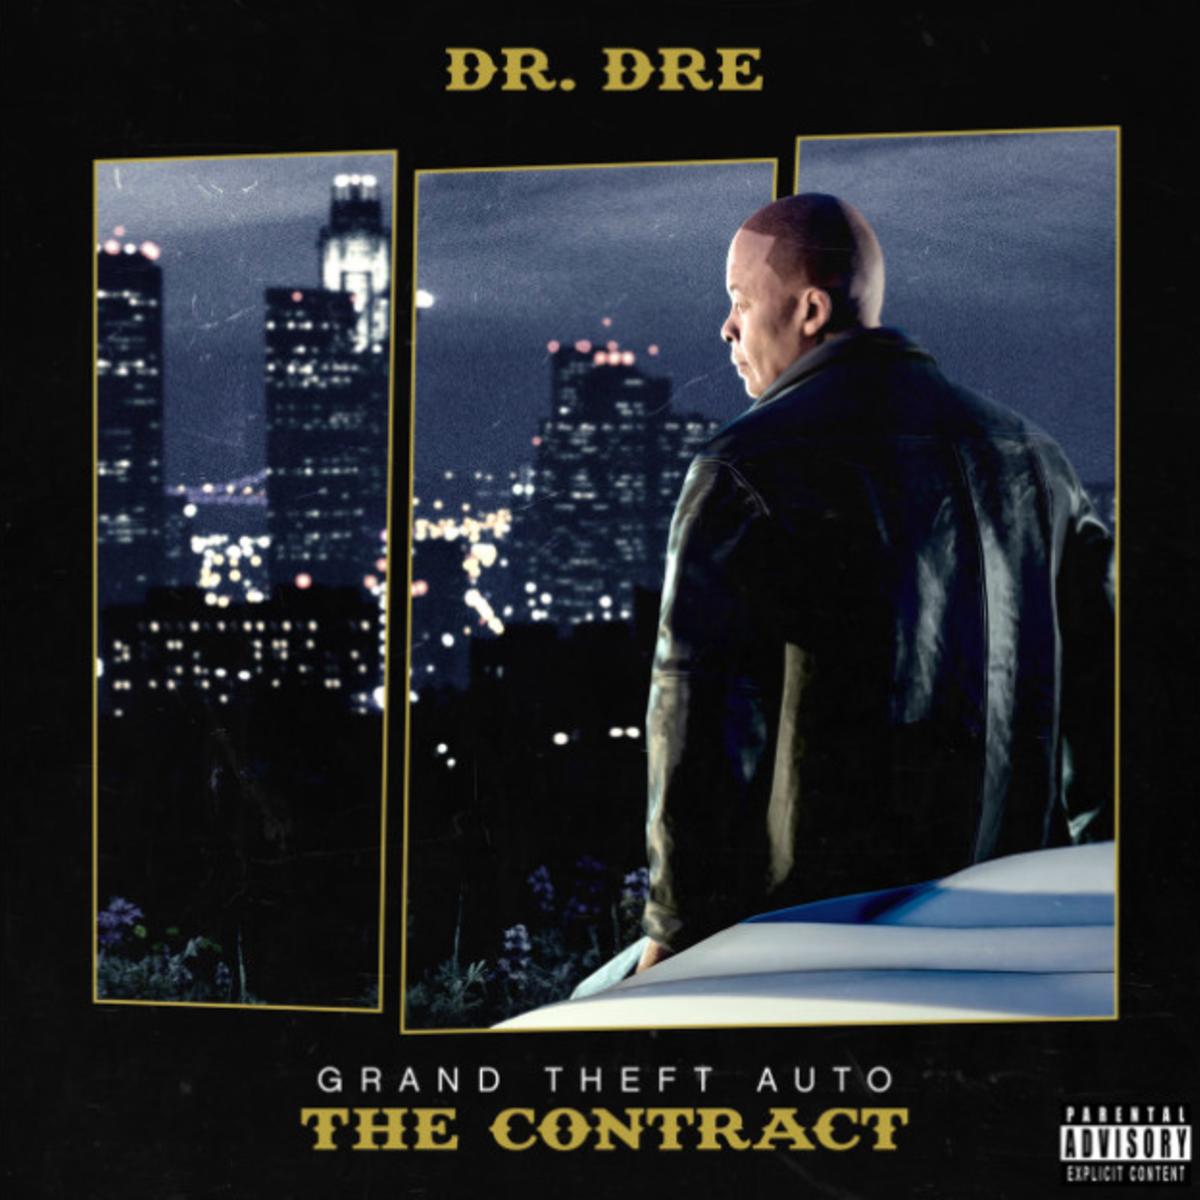 Dr. Dre Recruits Busta Rhymes, Anderson .Paak & Snoop Dogg For “ETA”